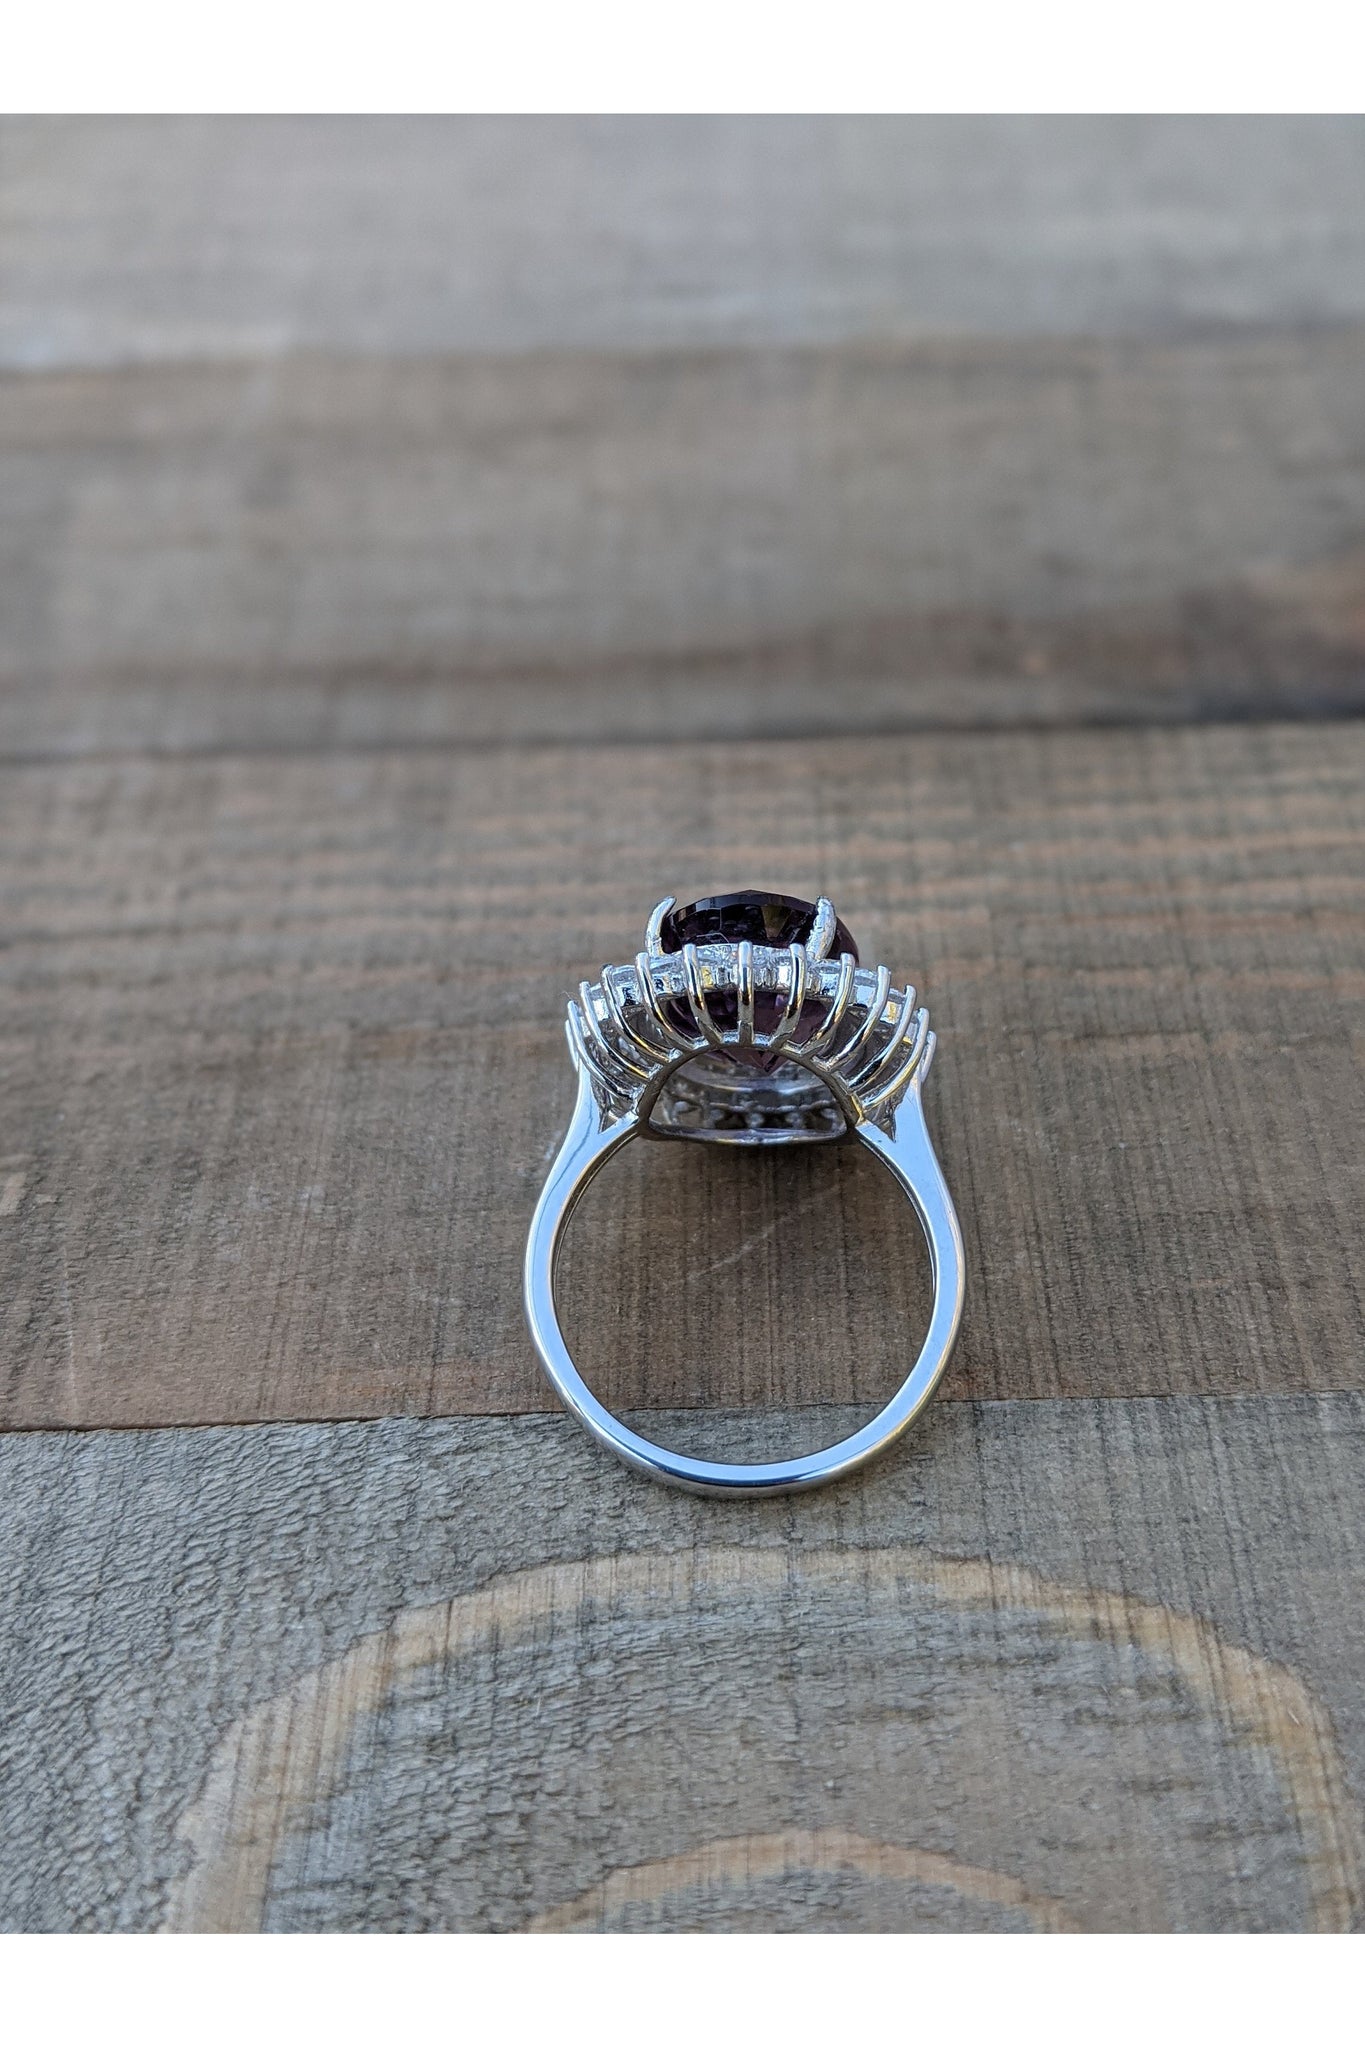 Amethyst Cluster Silver Ring with CZ